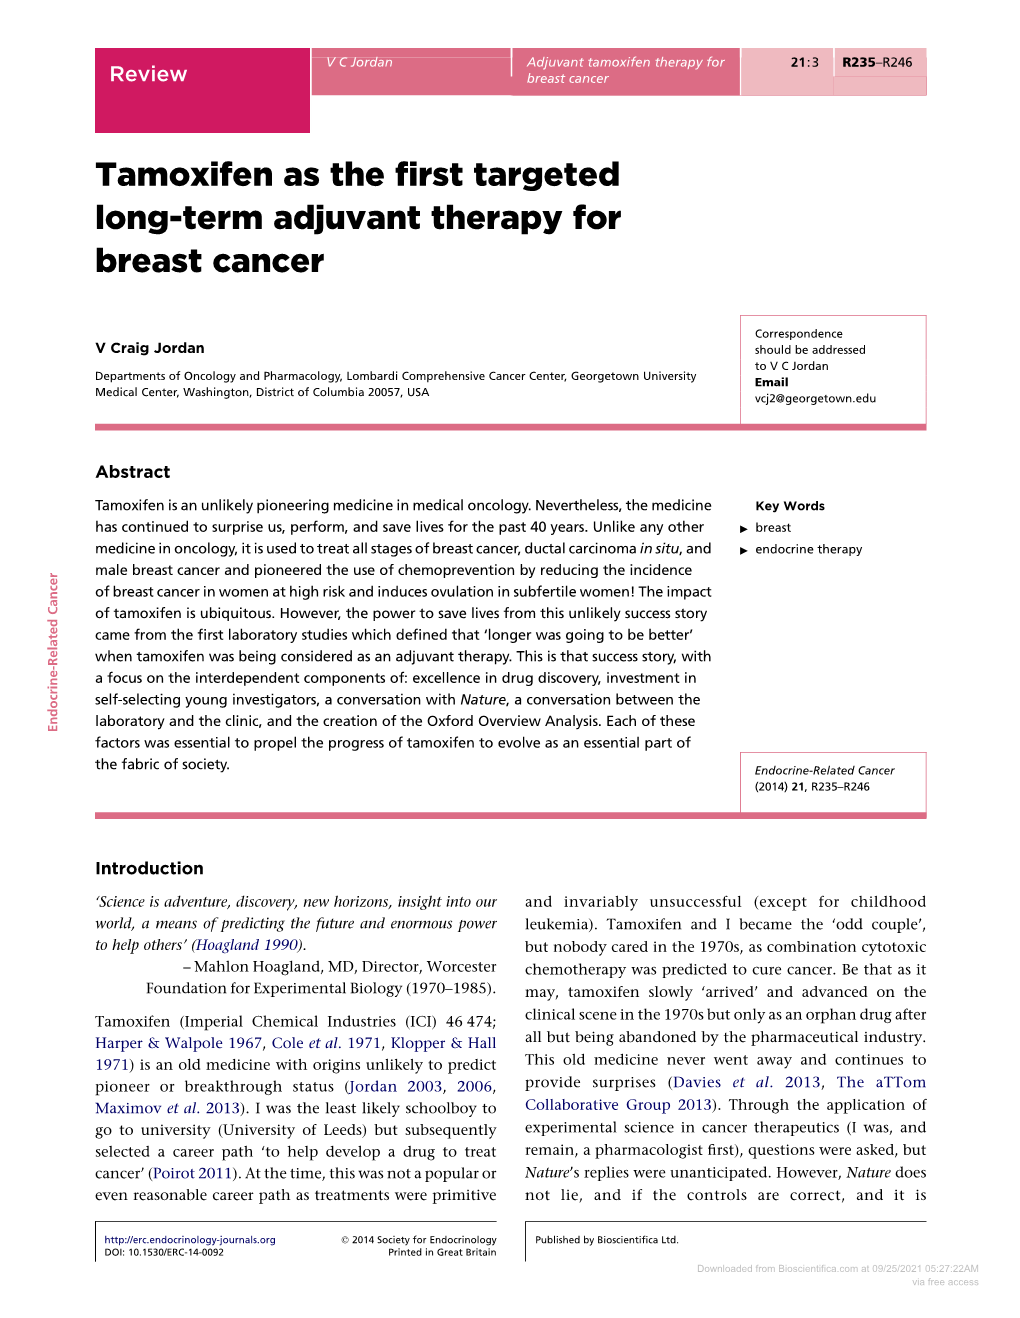 Tamoxifen As the First Targeted Long-Term Adjuvant Therapy for Breast